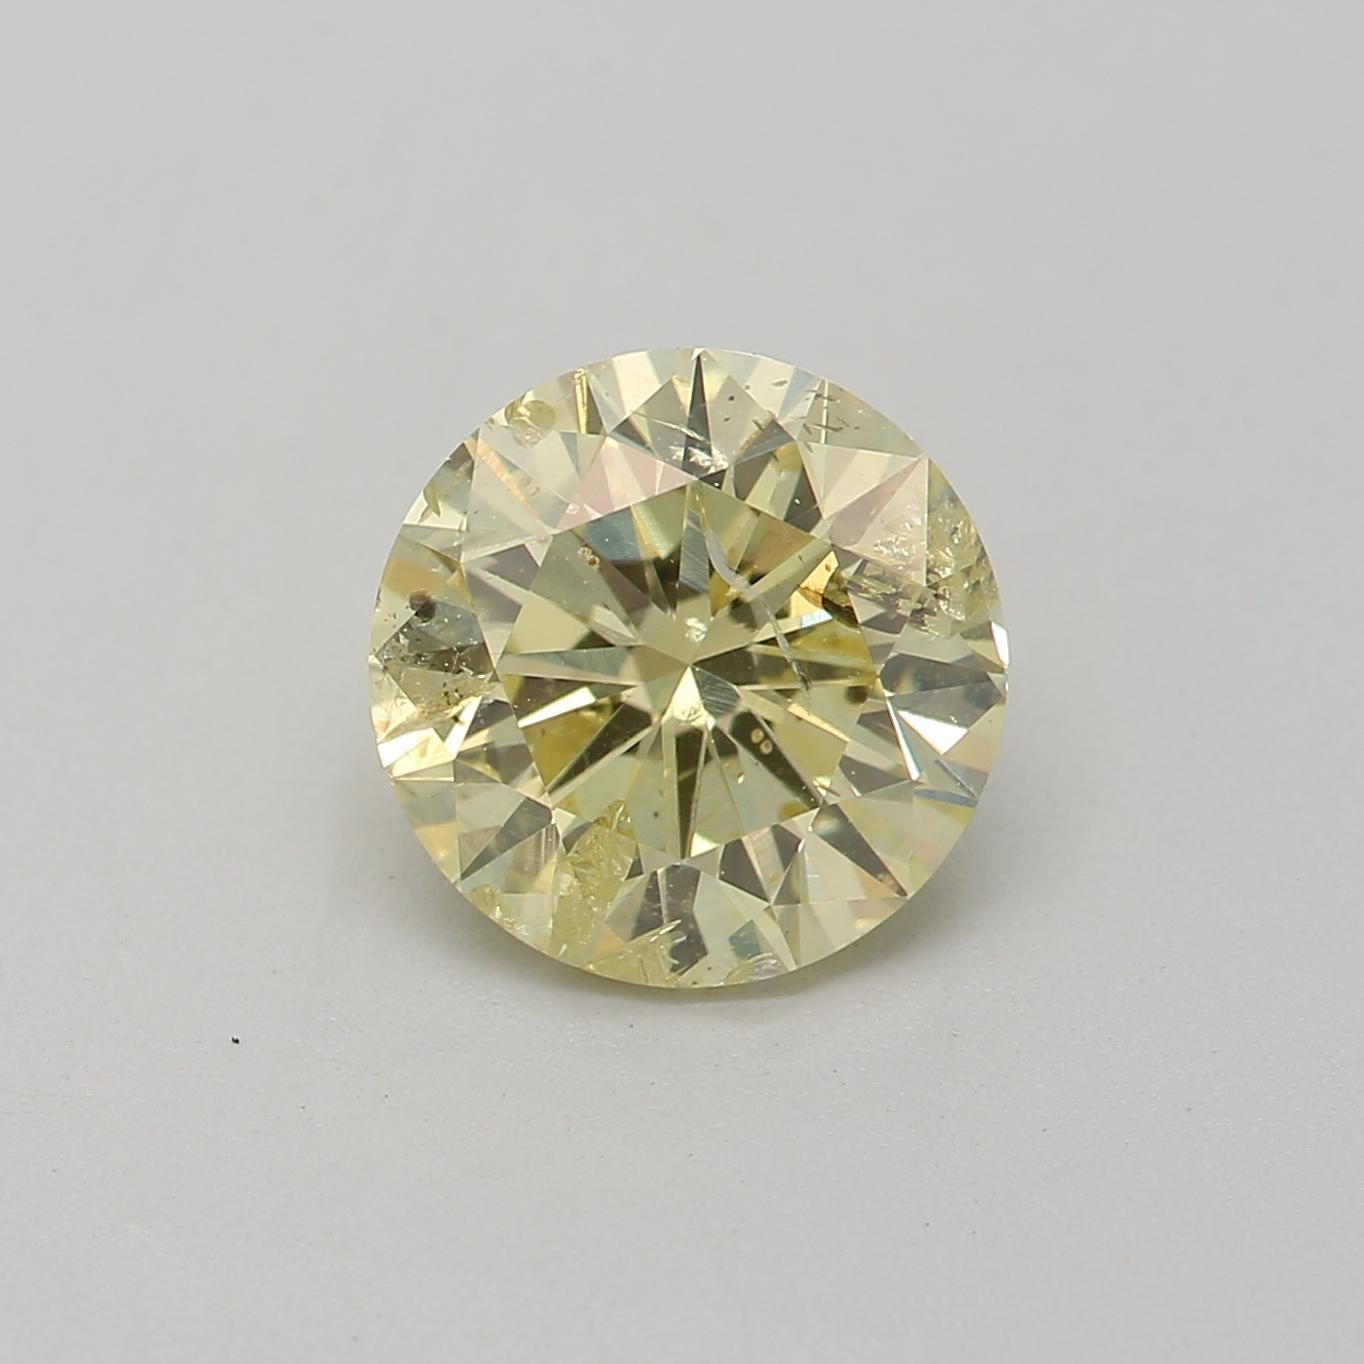 *100% NATURAL FANCY COLOUR DIAMOND*

✪ Diamond Details ✪

➛ Shape: Round
➛ Colour Grade: Fancy Yellow
➛ Carat: 1.06
➛ Clarity: I3
➛ GIA Certified 

^FEATURES OF THE DIAMOND^

This Fancy Yellow diamond is a type of colored diamond with a vivid yellow